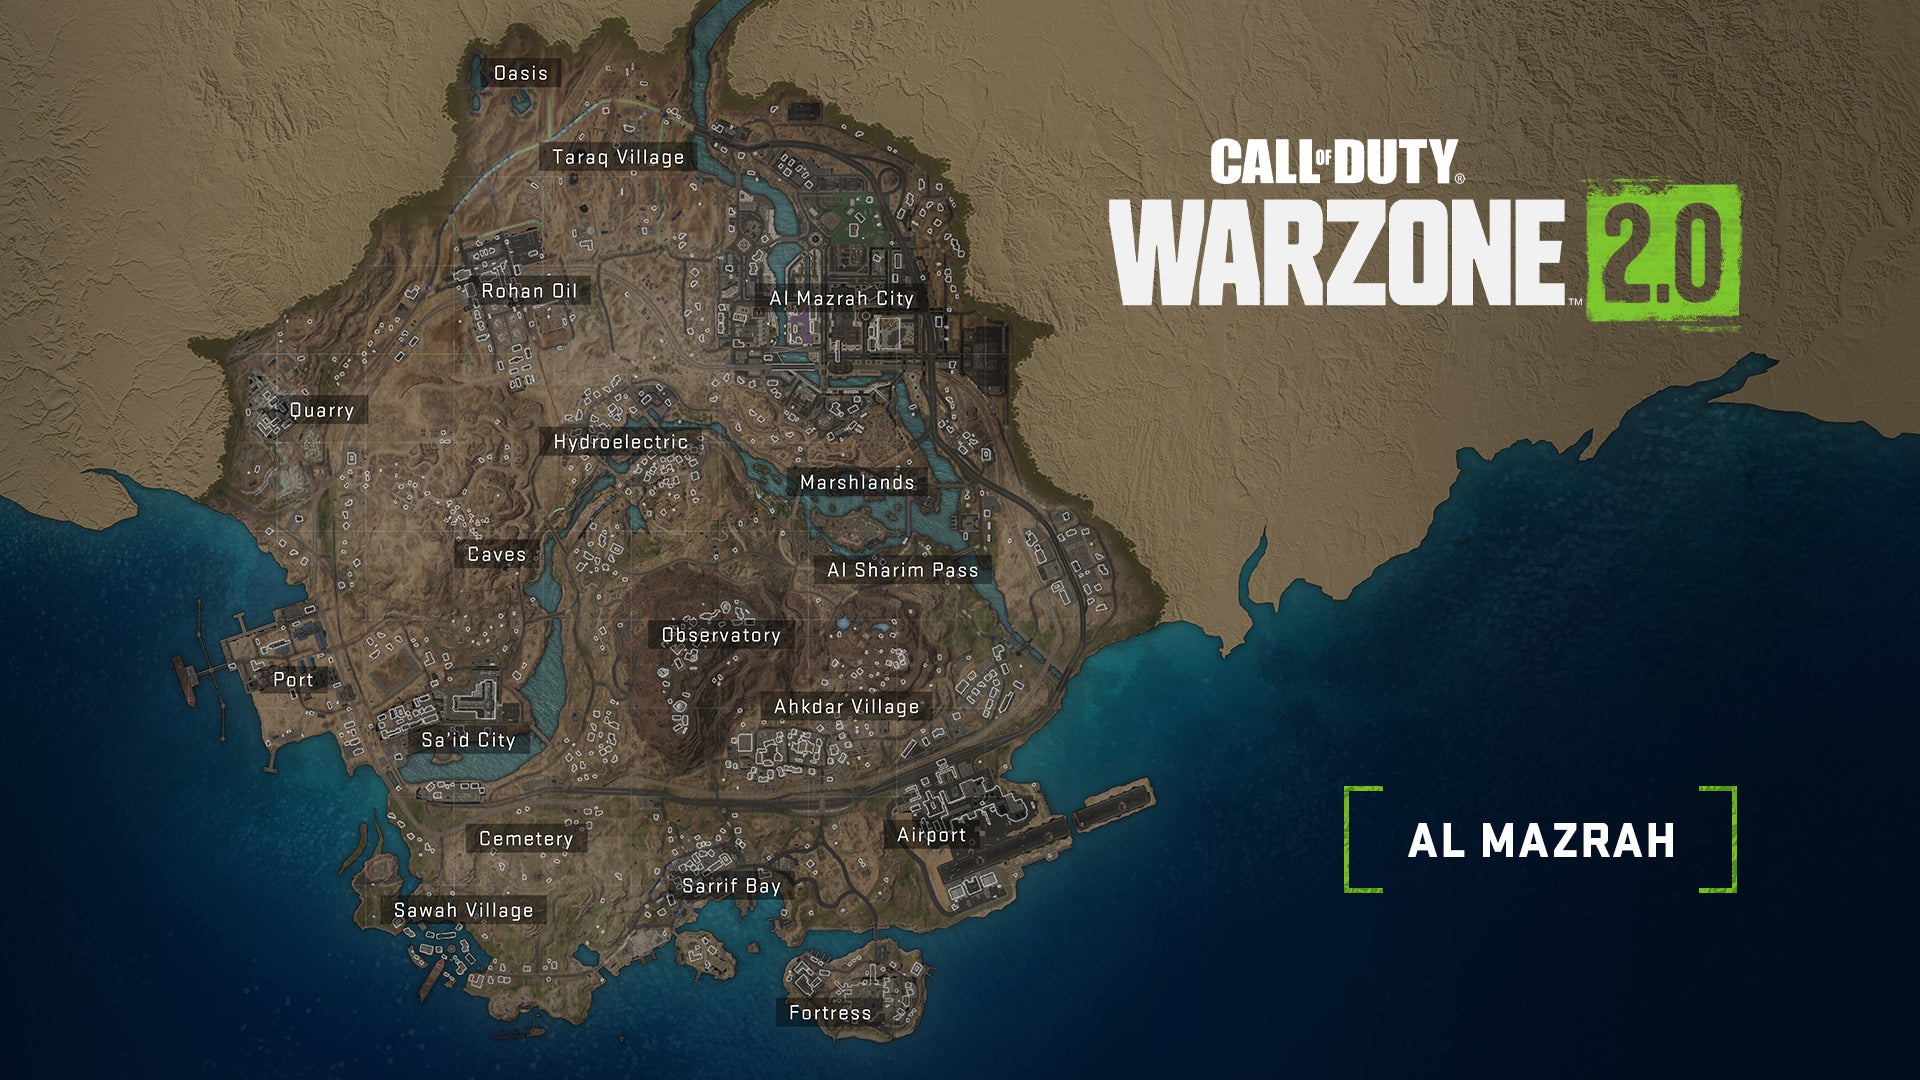 Call Of Duty Warzone 2.0's first-look Al Mazrah map.